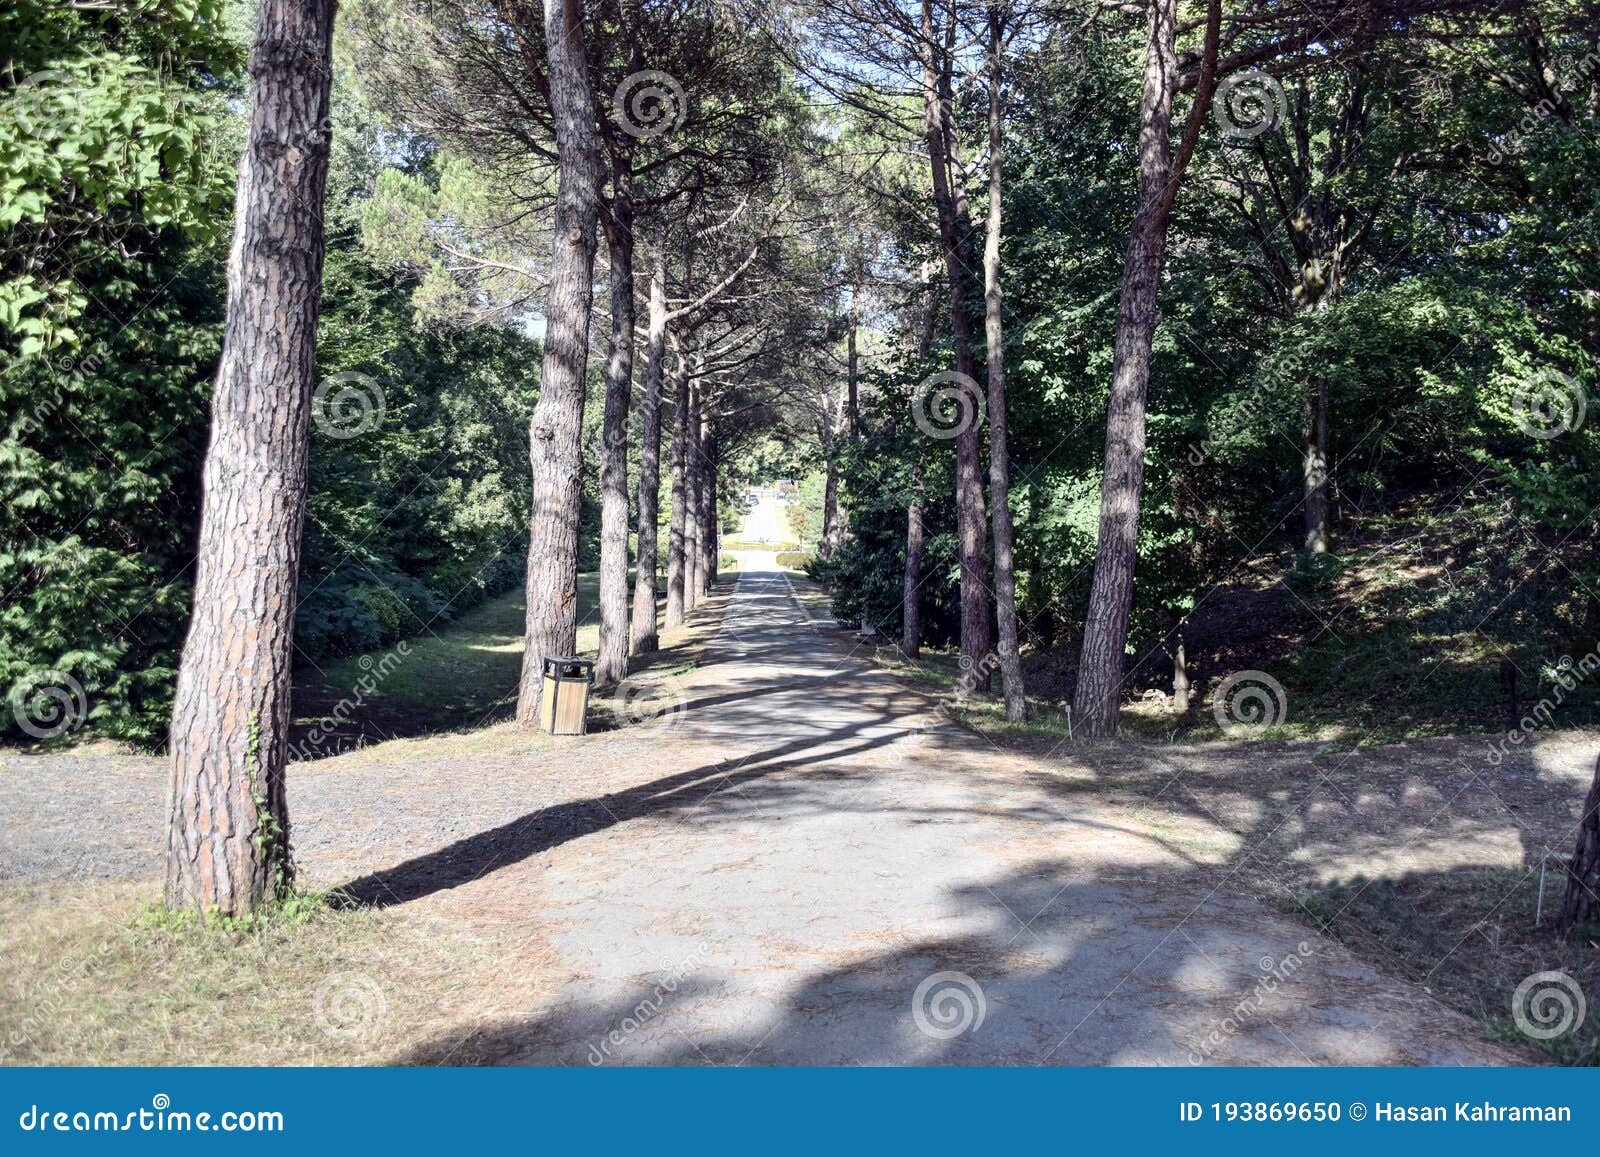 walking path in the forest